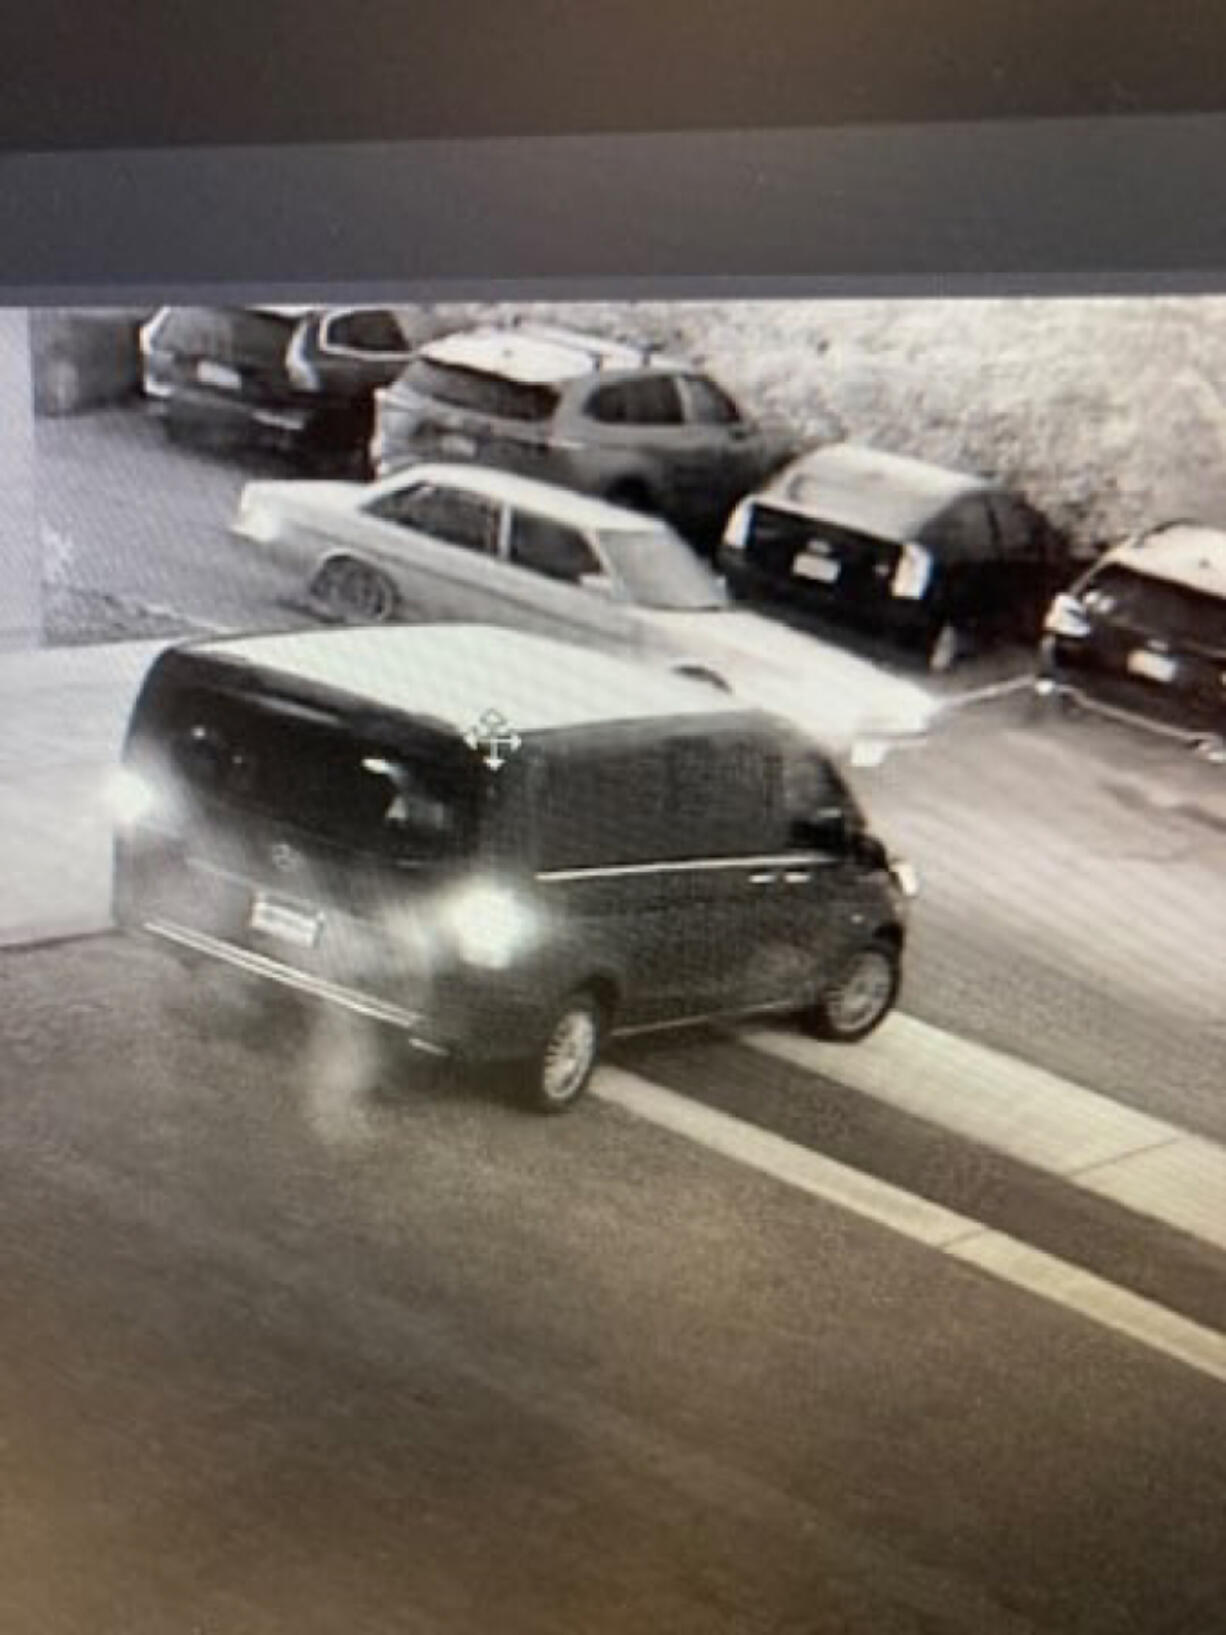 Portland police are searching for this stolen Mercedes-Benz van, which contained four show dogs.